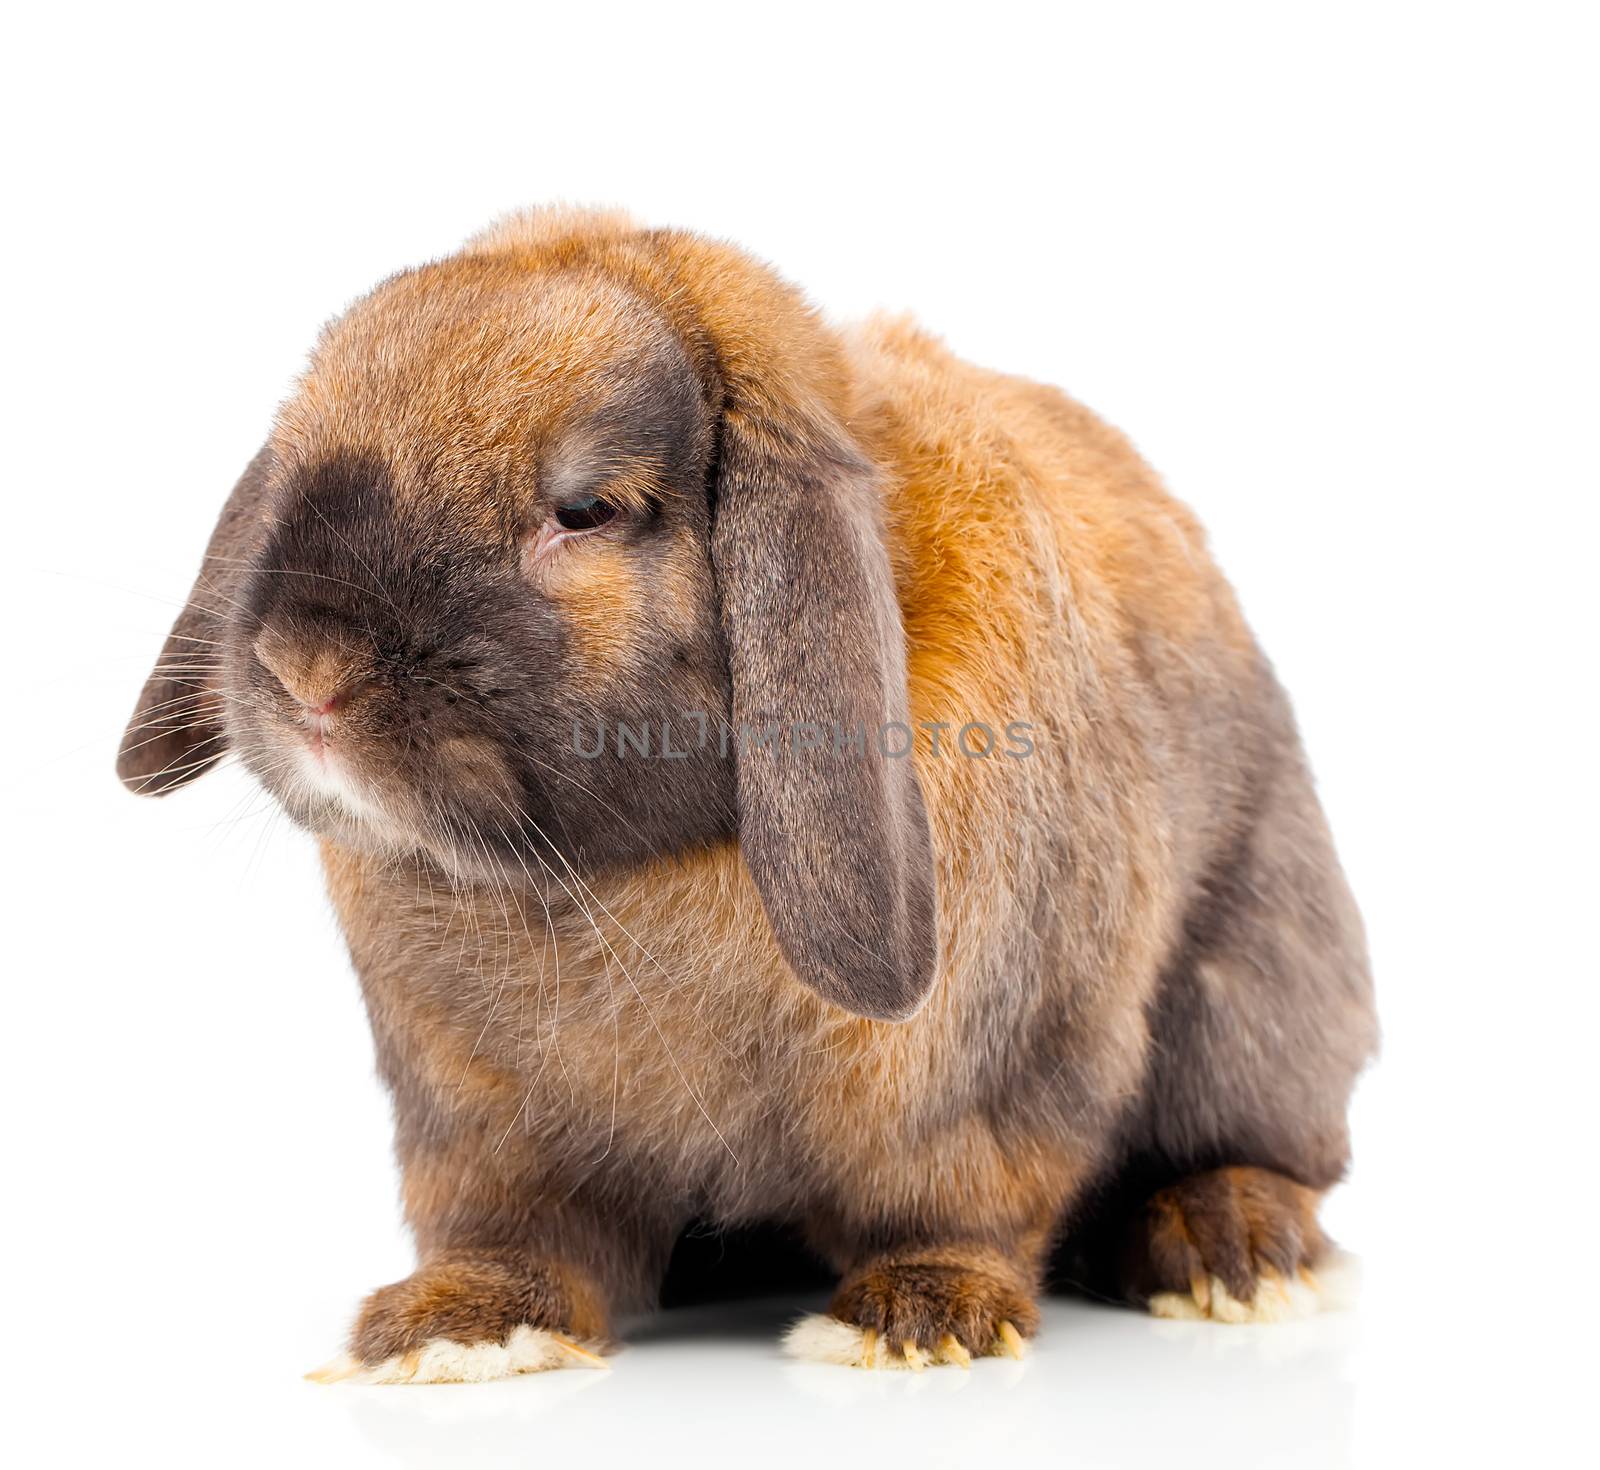 Isolated image of a brown rabbit.